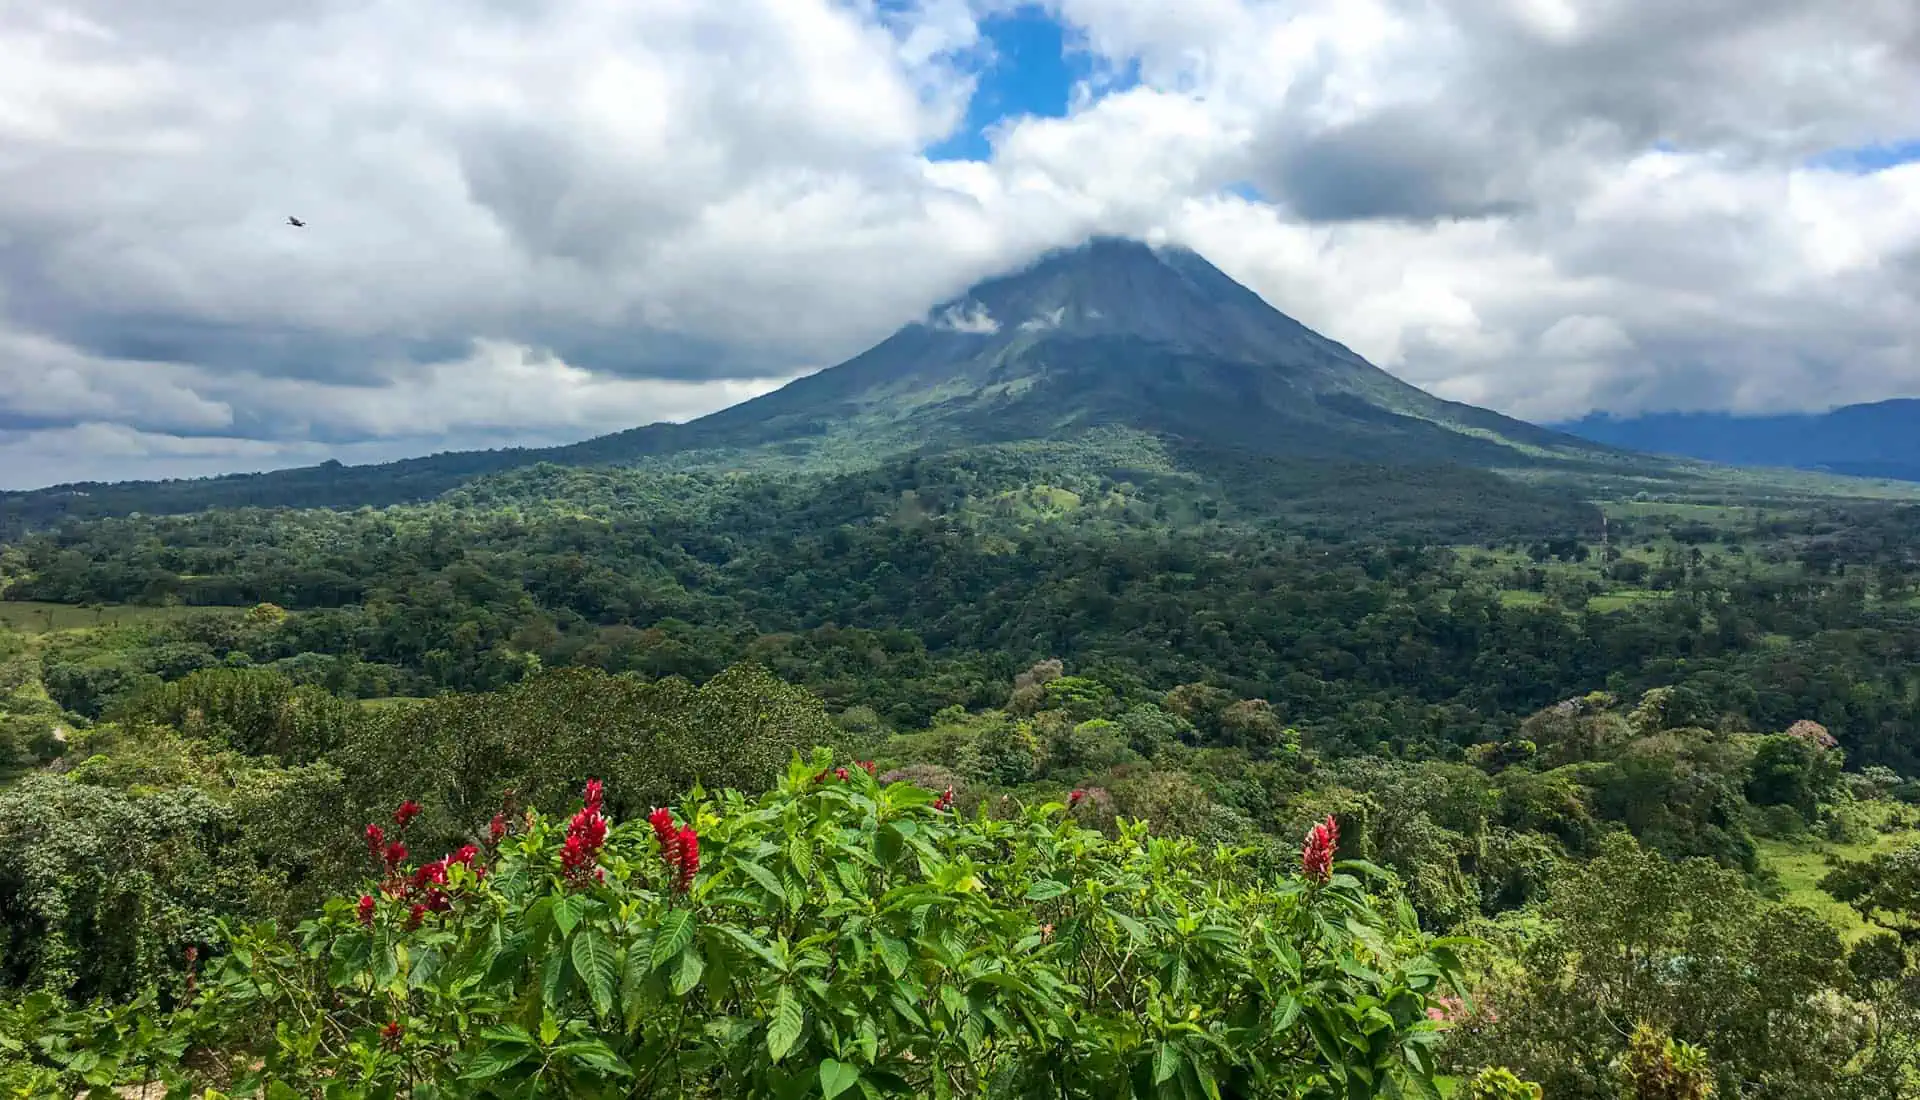 Views of imposing Arenal Volcano, in the national park of the same name - one of the 5 must-see parks in Costa Rica.